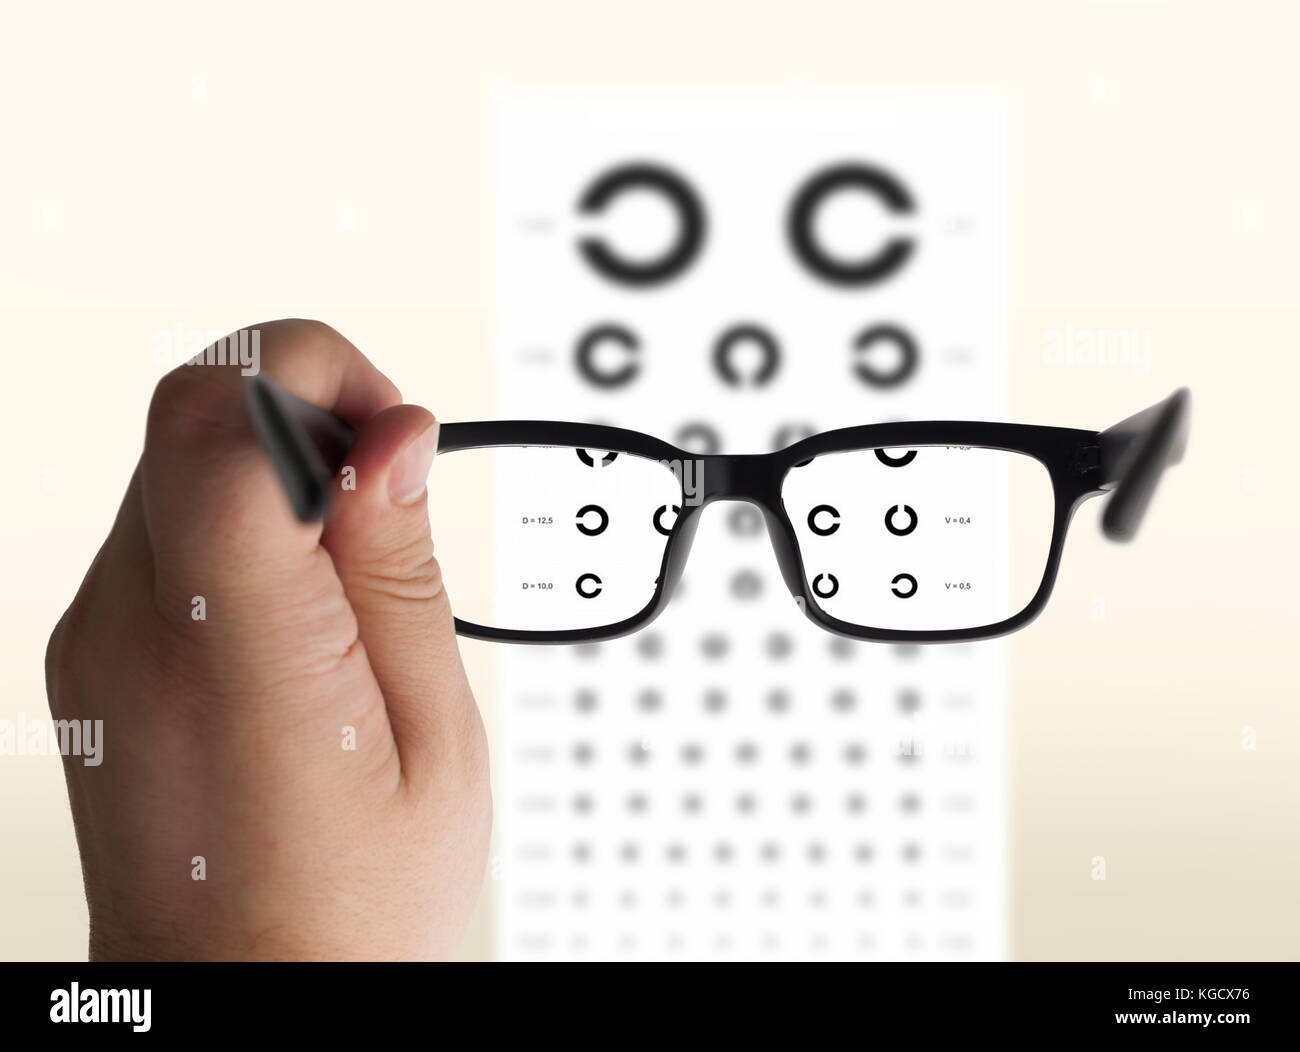 Eyeglasses in hand for eyesight. On the background of a chart test for eyes of Landolt C, isolated Stock Photo